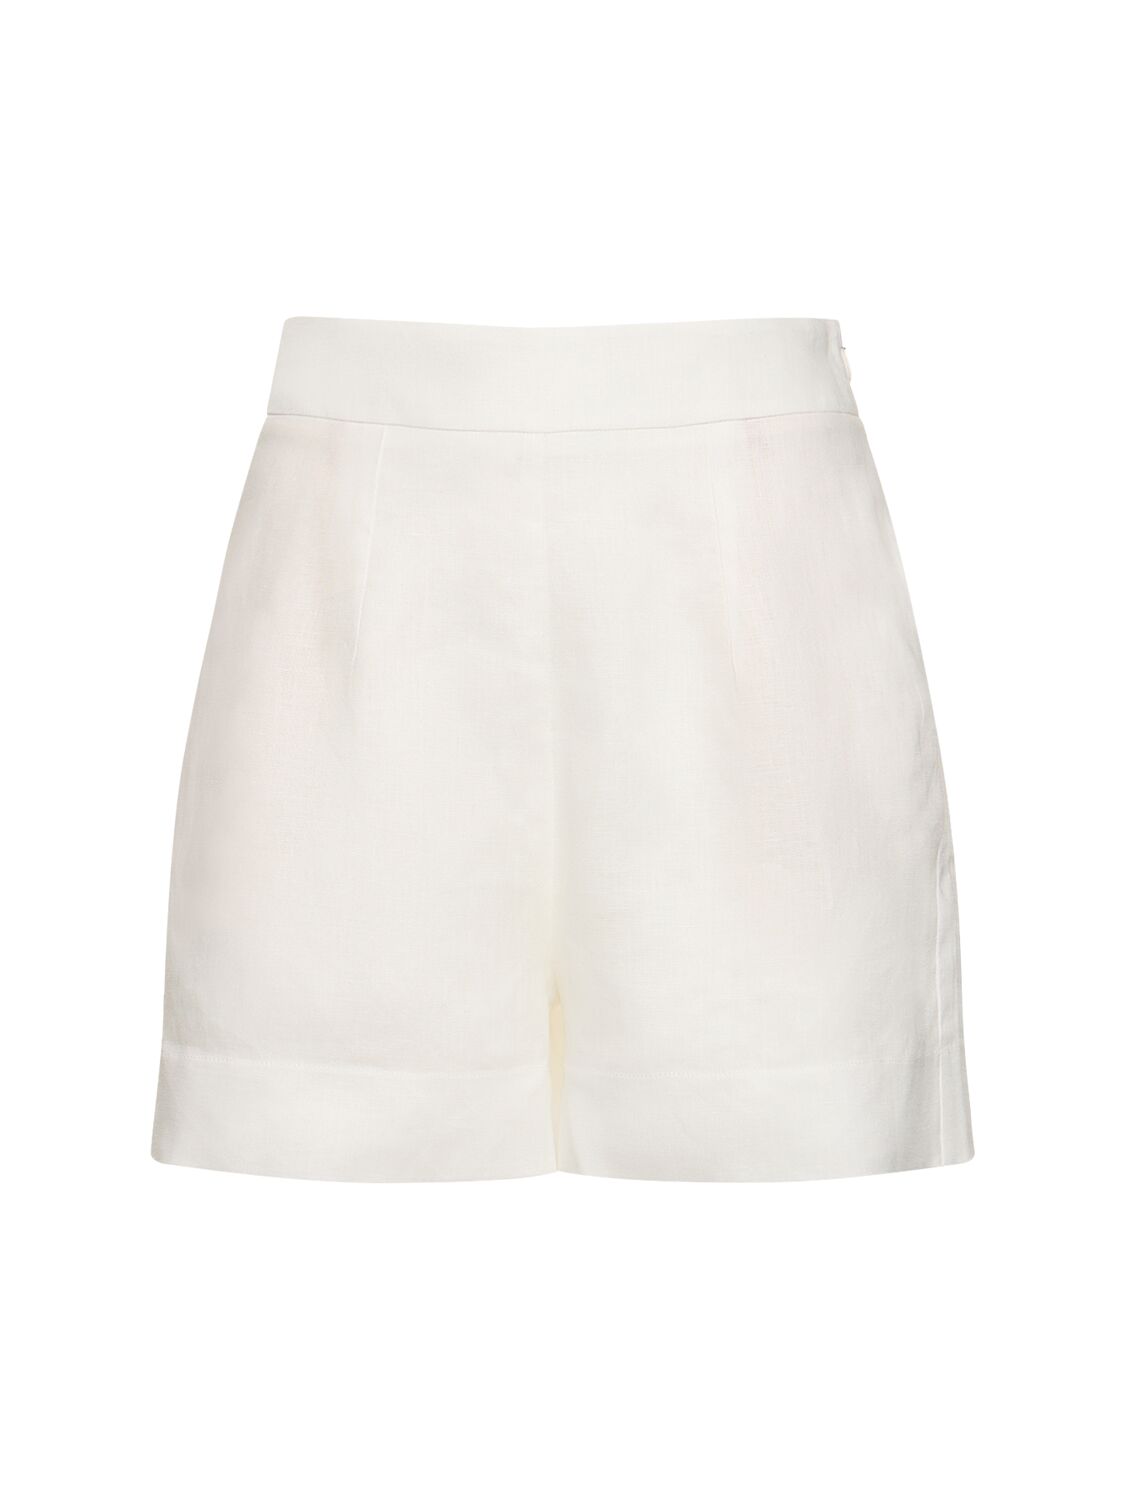 Image of High Rise Linen Shorts